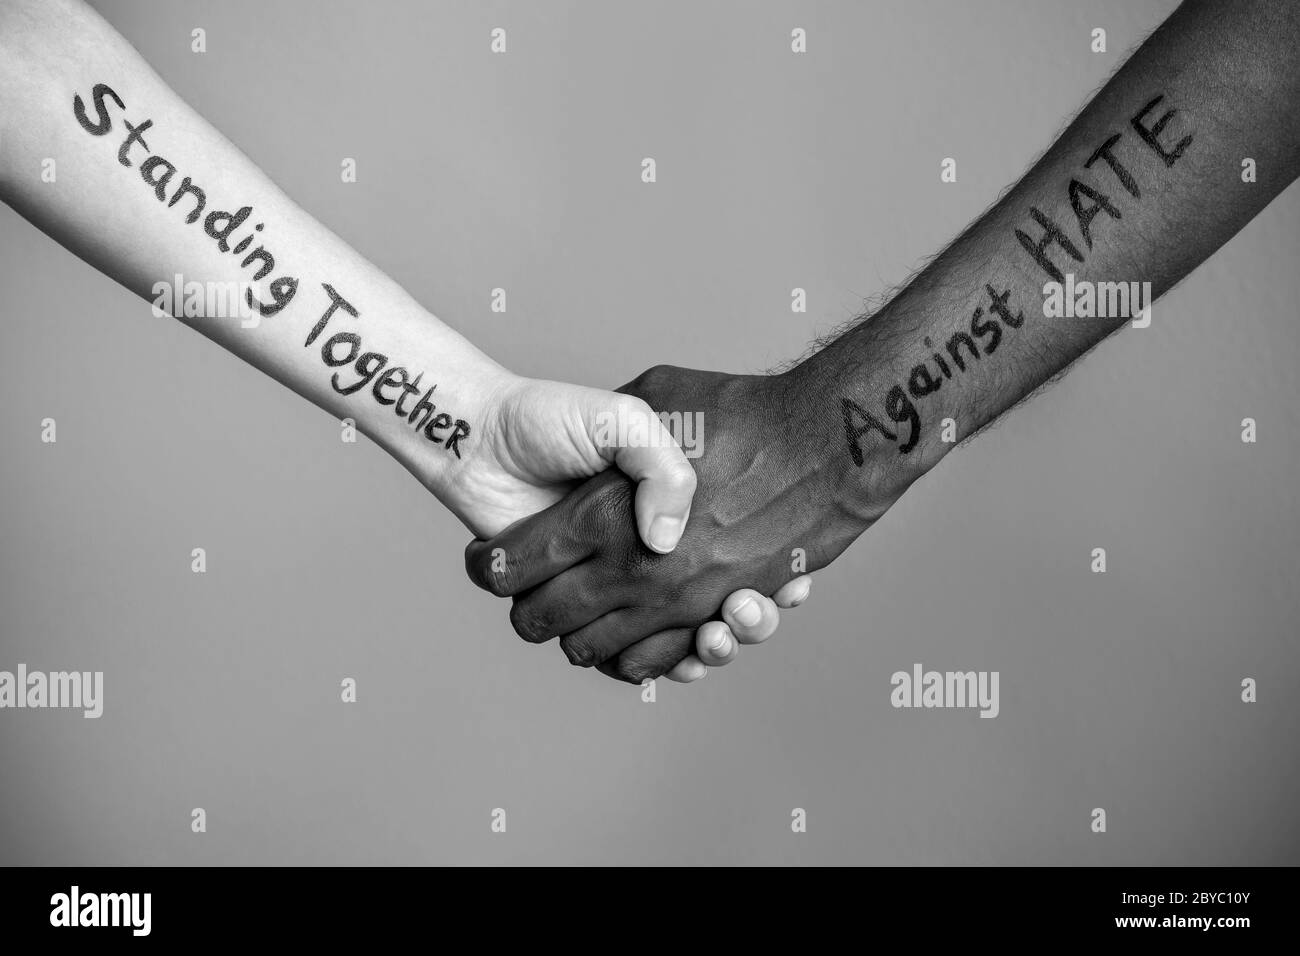 Handshake between black and white human woman and male hands with message text Standing Together against HATE. Concept of Black Lives Matter protest Stock Photo